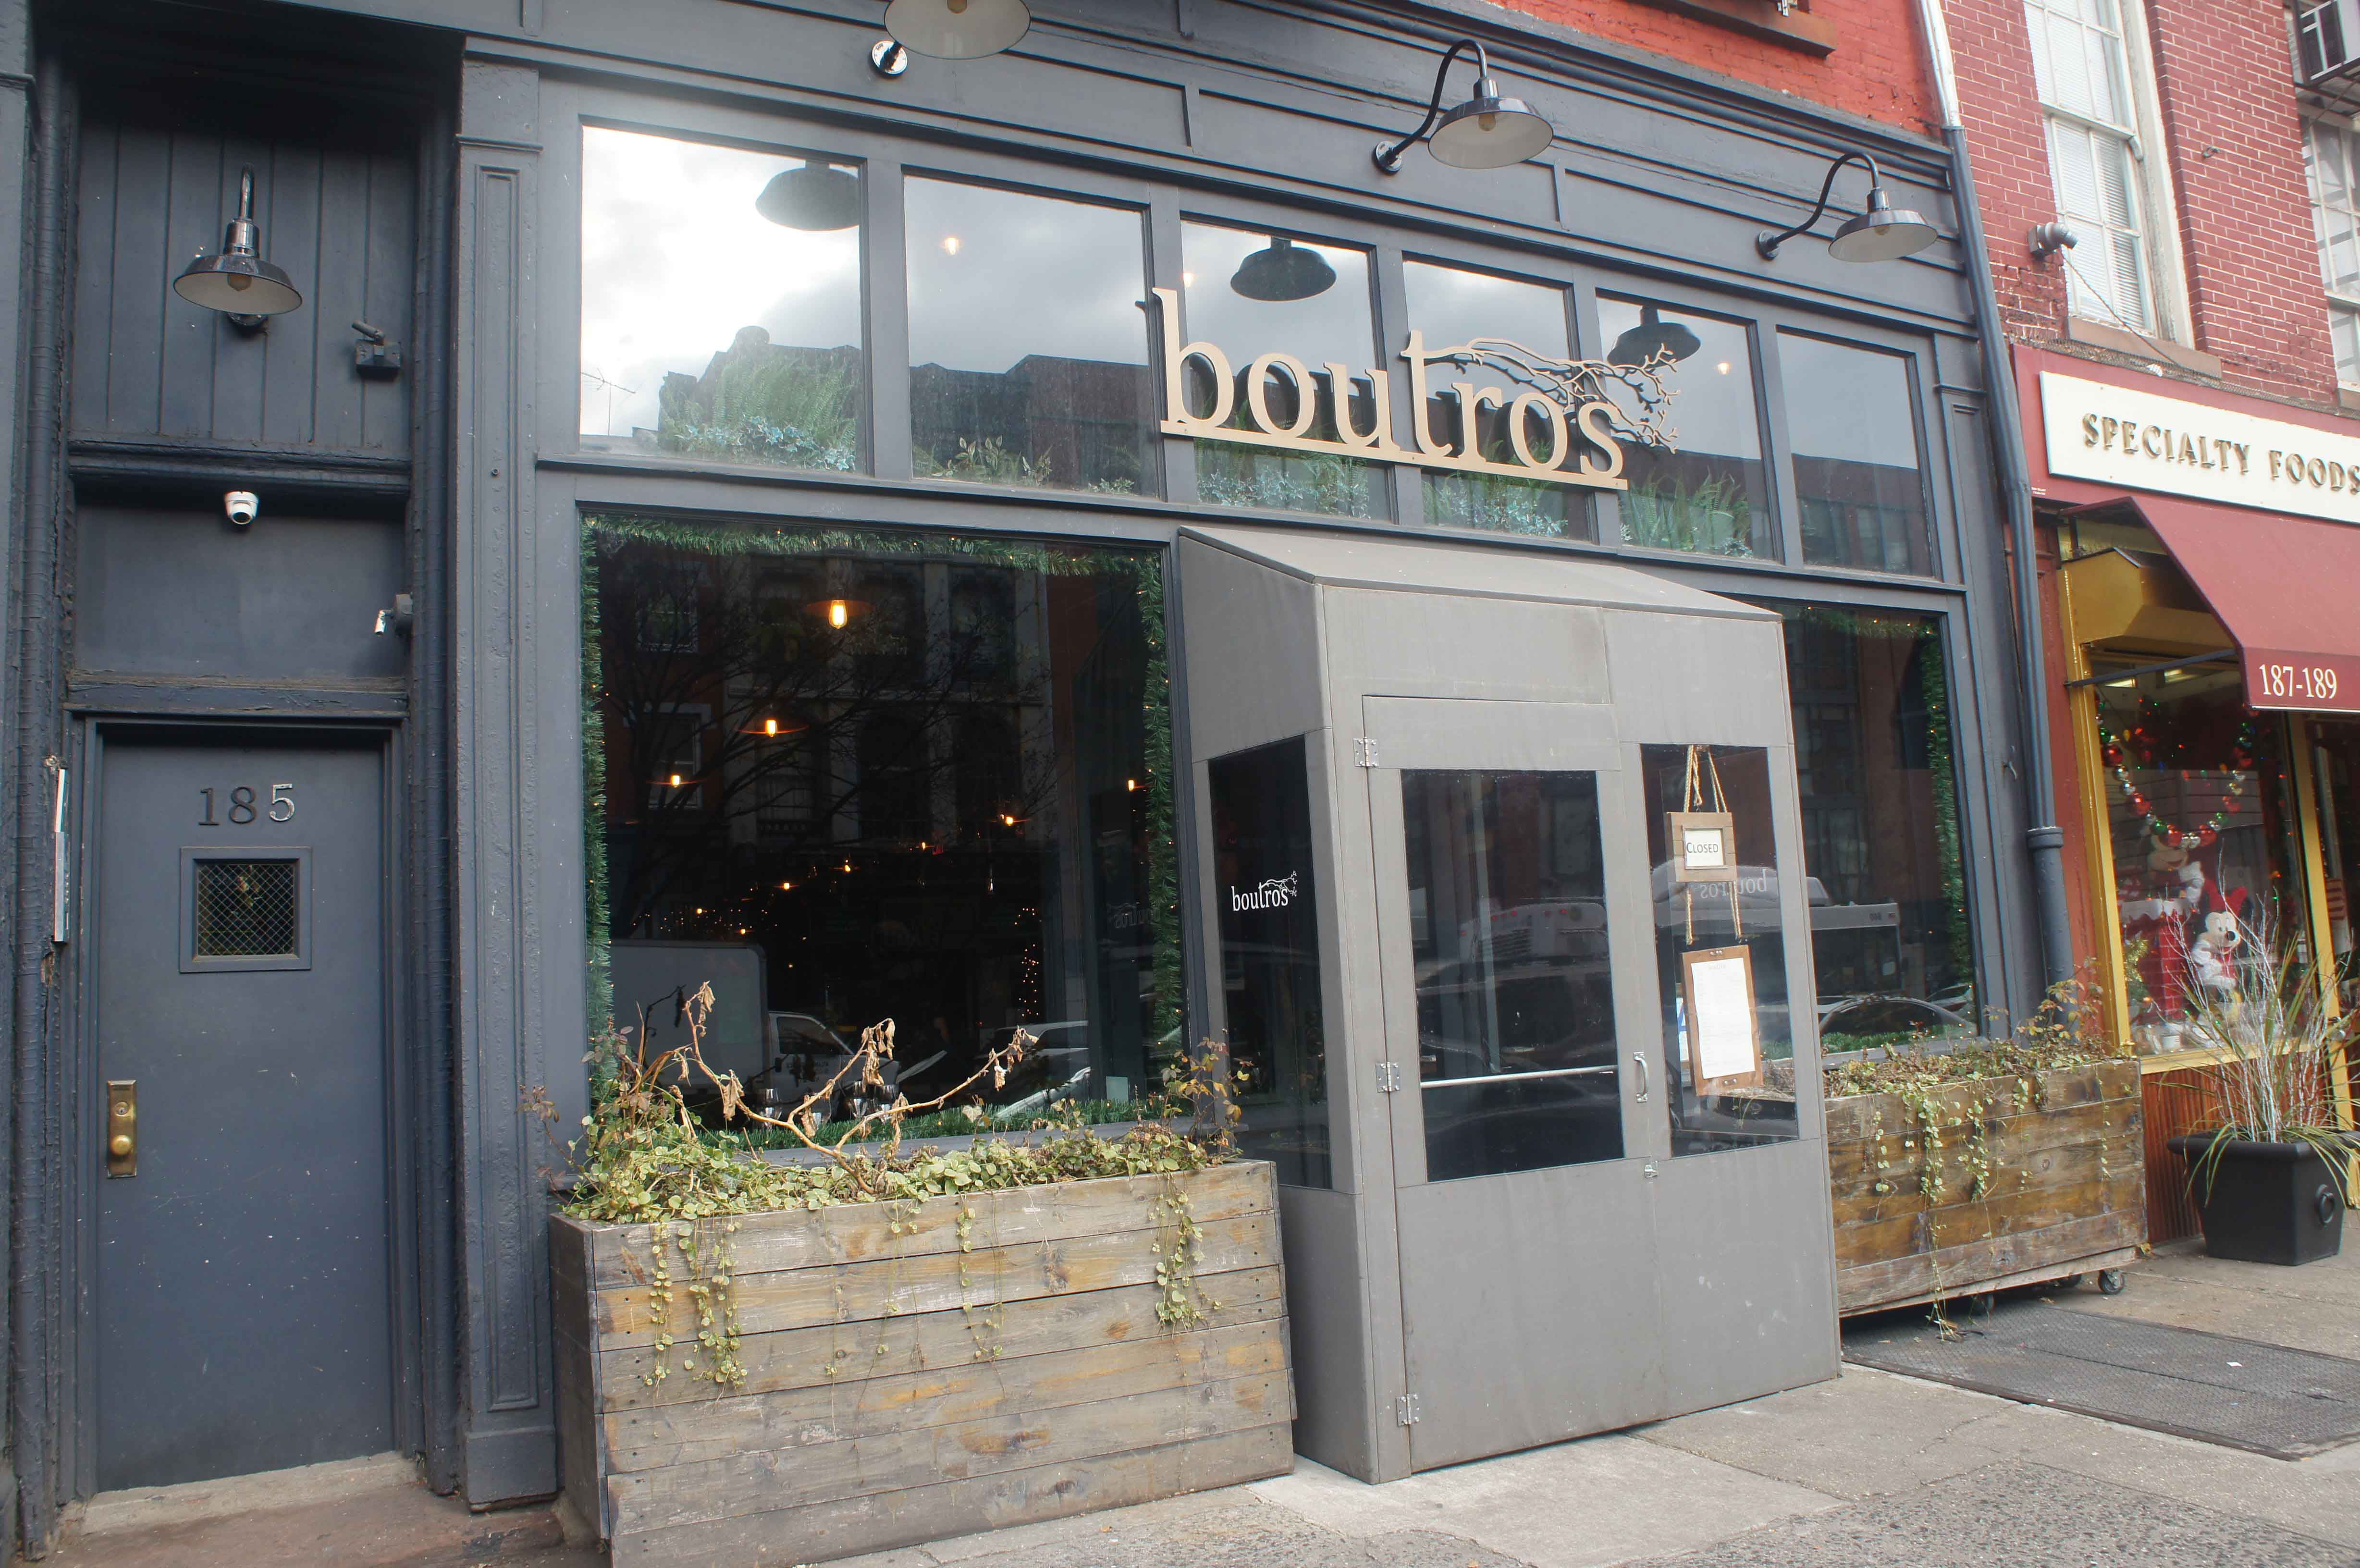 American & Middle Eastern cooking styles meld at Boutros, pictured, a modern dining spot with old- and new-world wines, on Atlantic Avenue, just steps from 2 Pierrepont Street